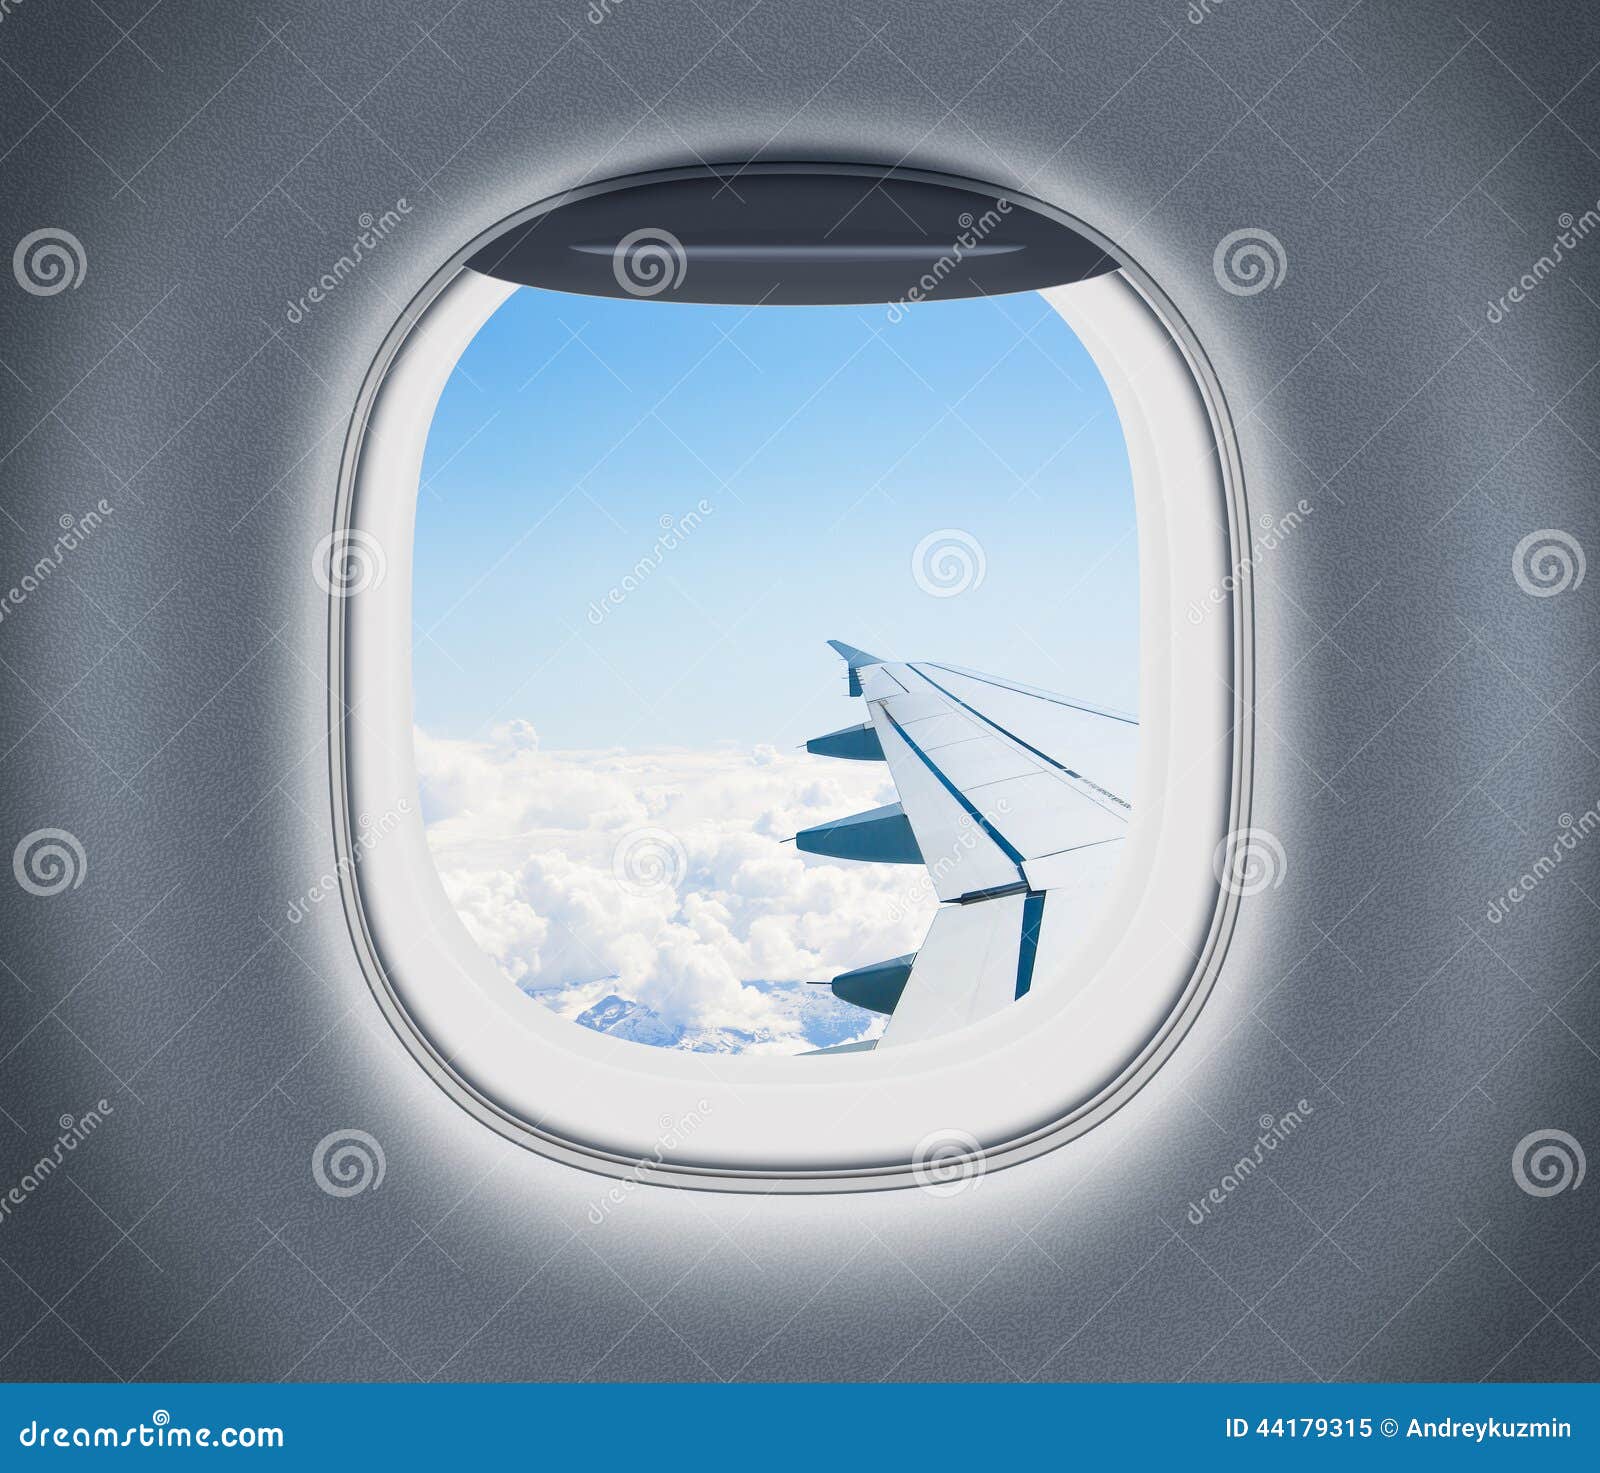 airplane or aeroplane window with wing and cloudy sky behind